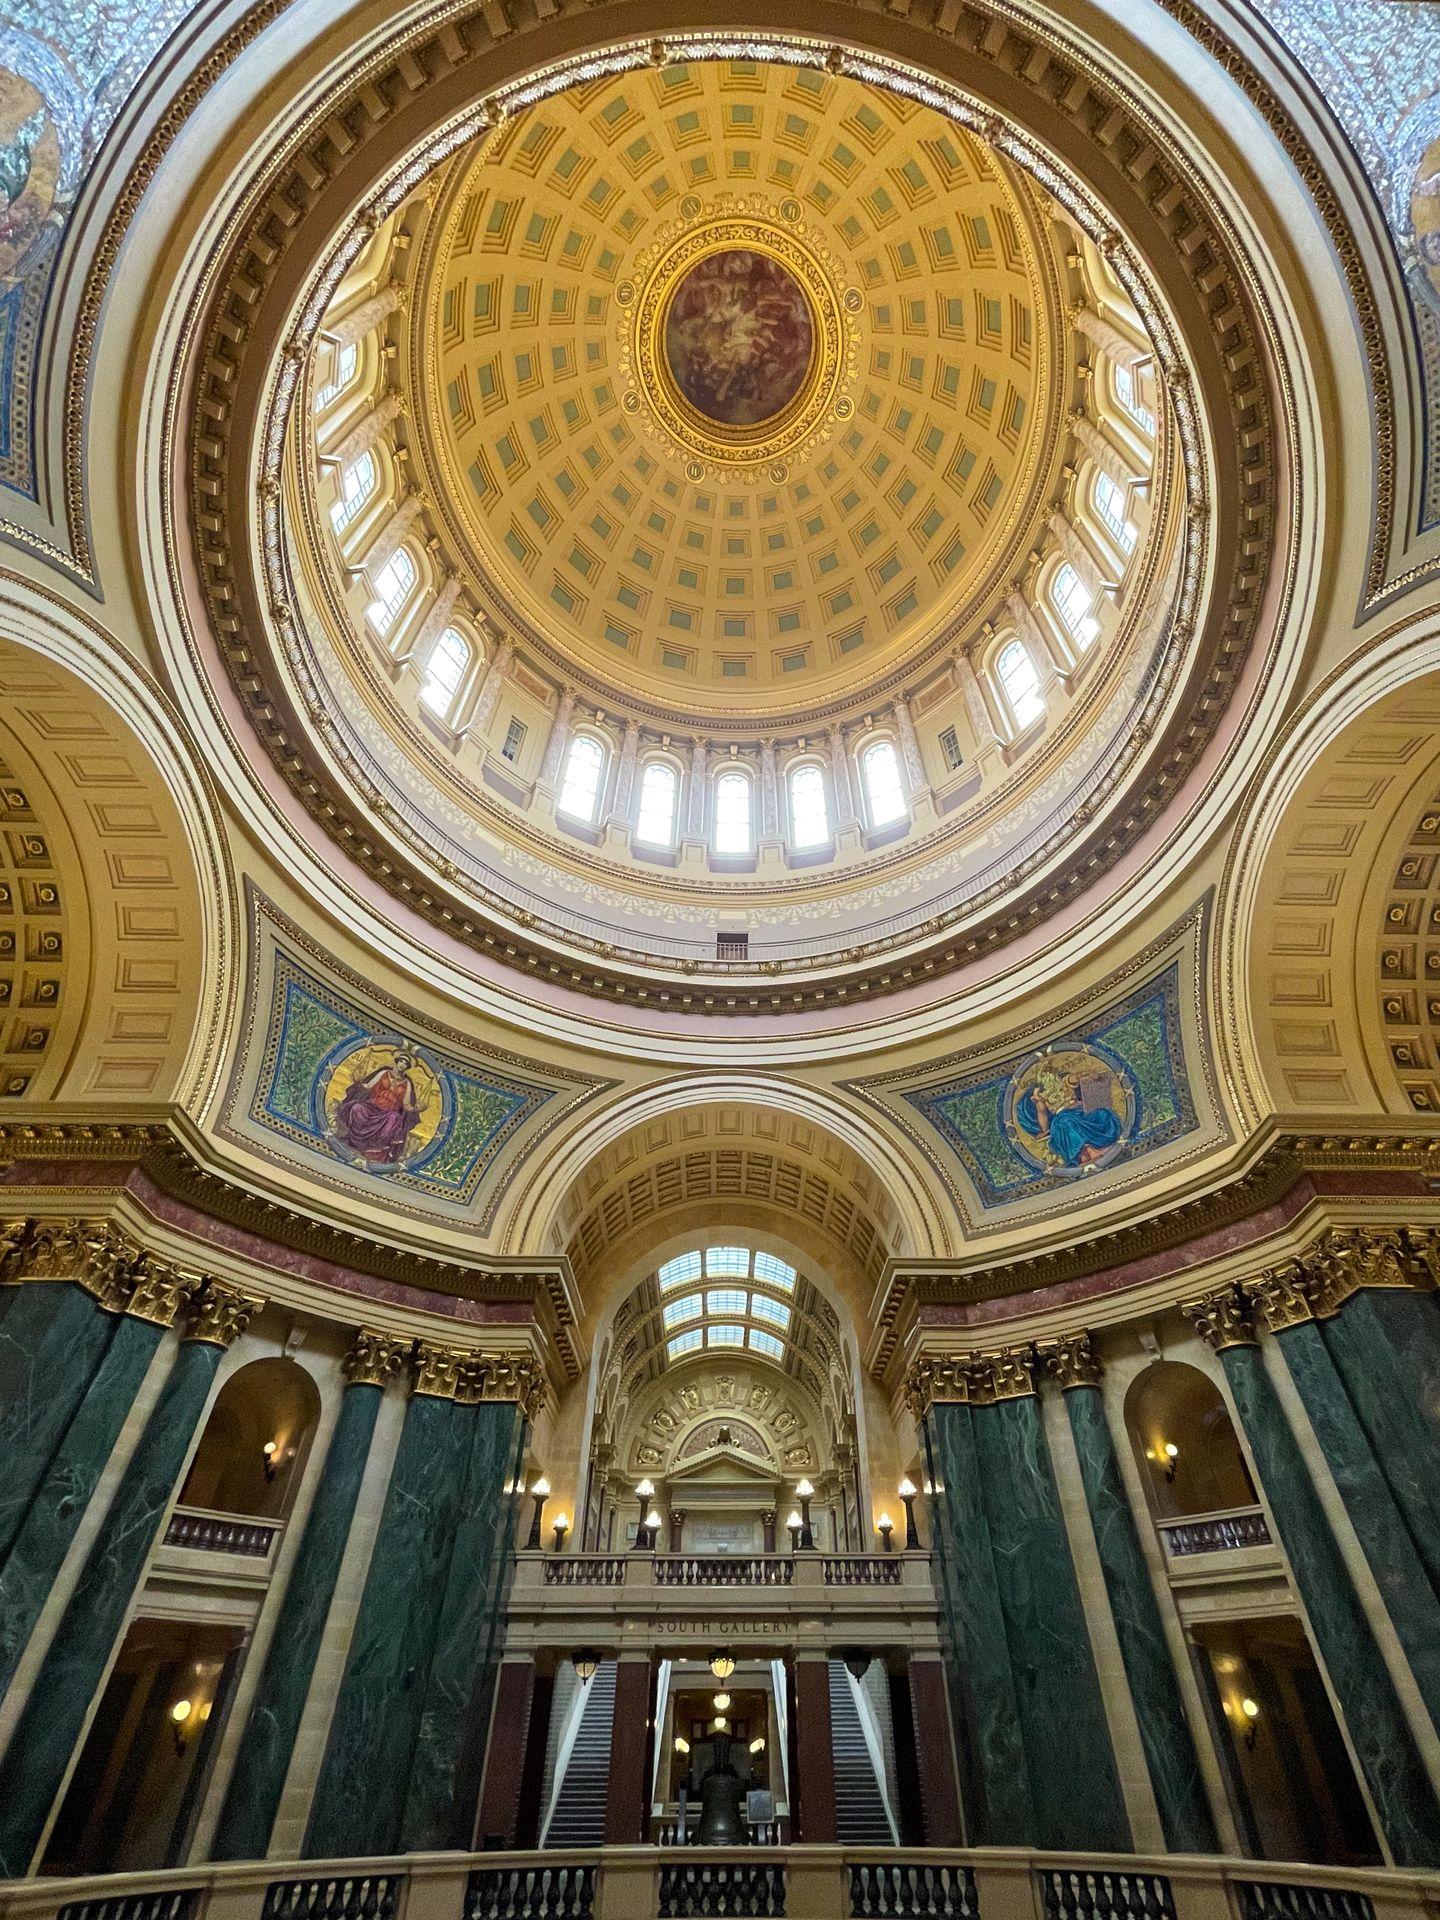 The interior of the dome of the Wisconsin state Capitol building. The interior is ornately decorated in gold and green.